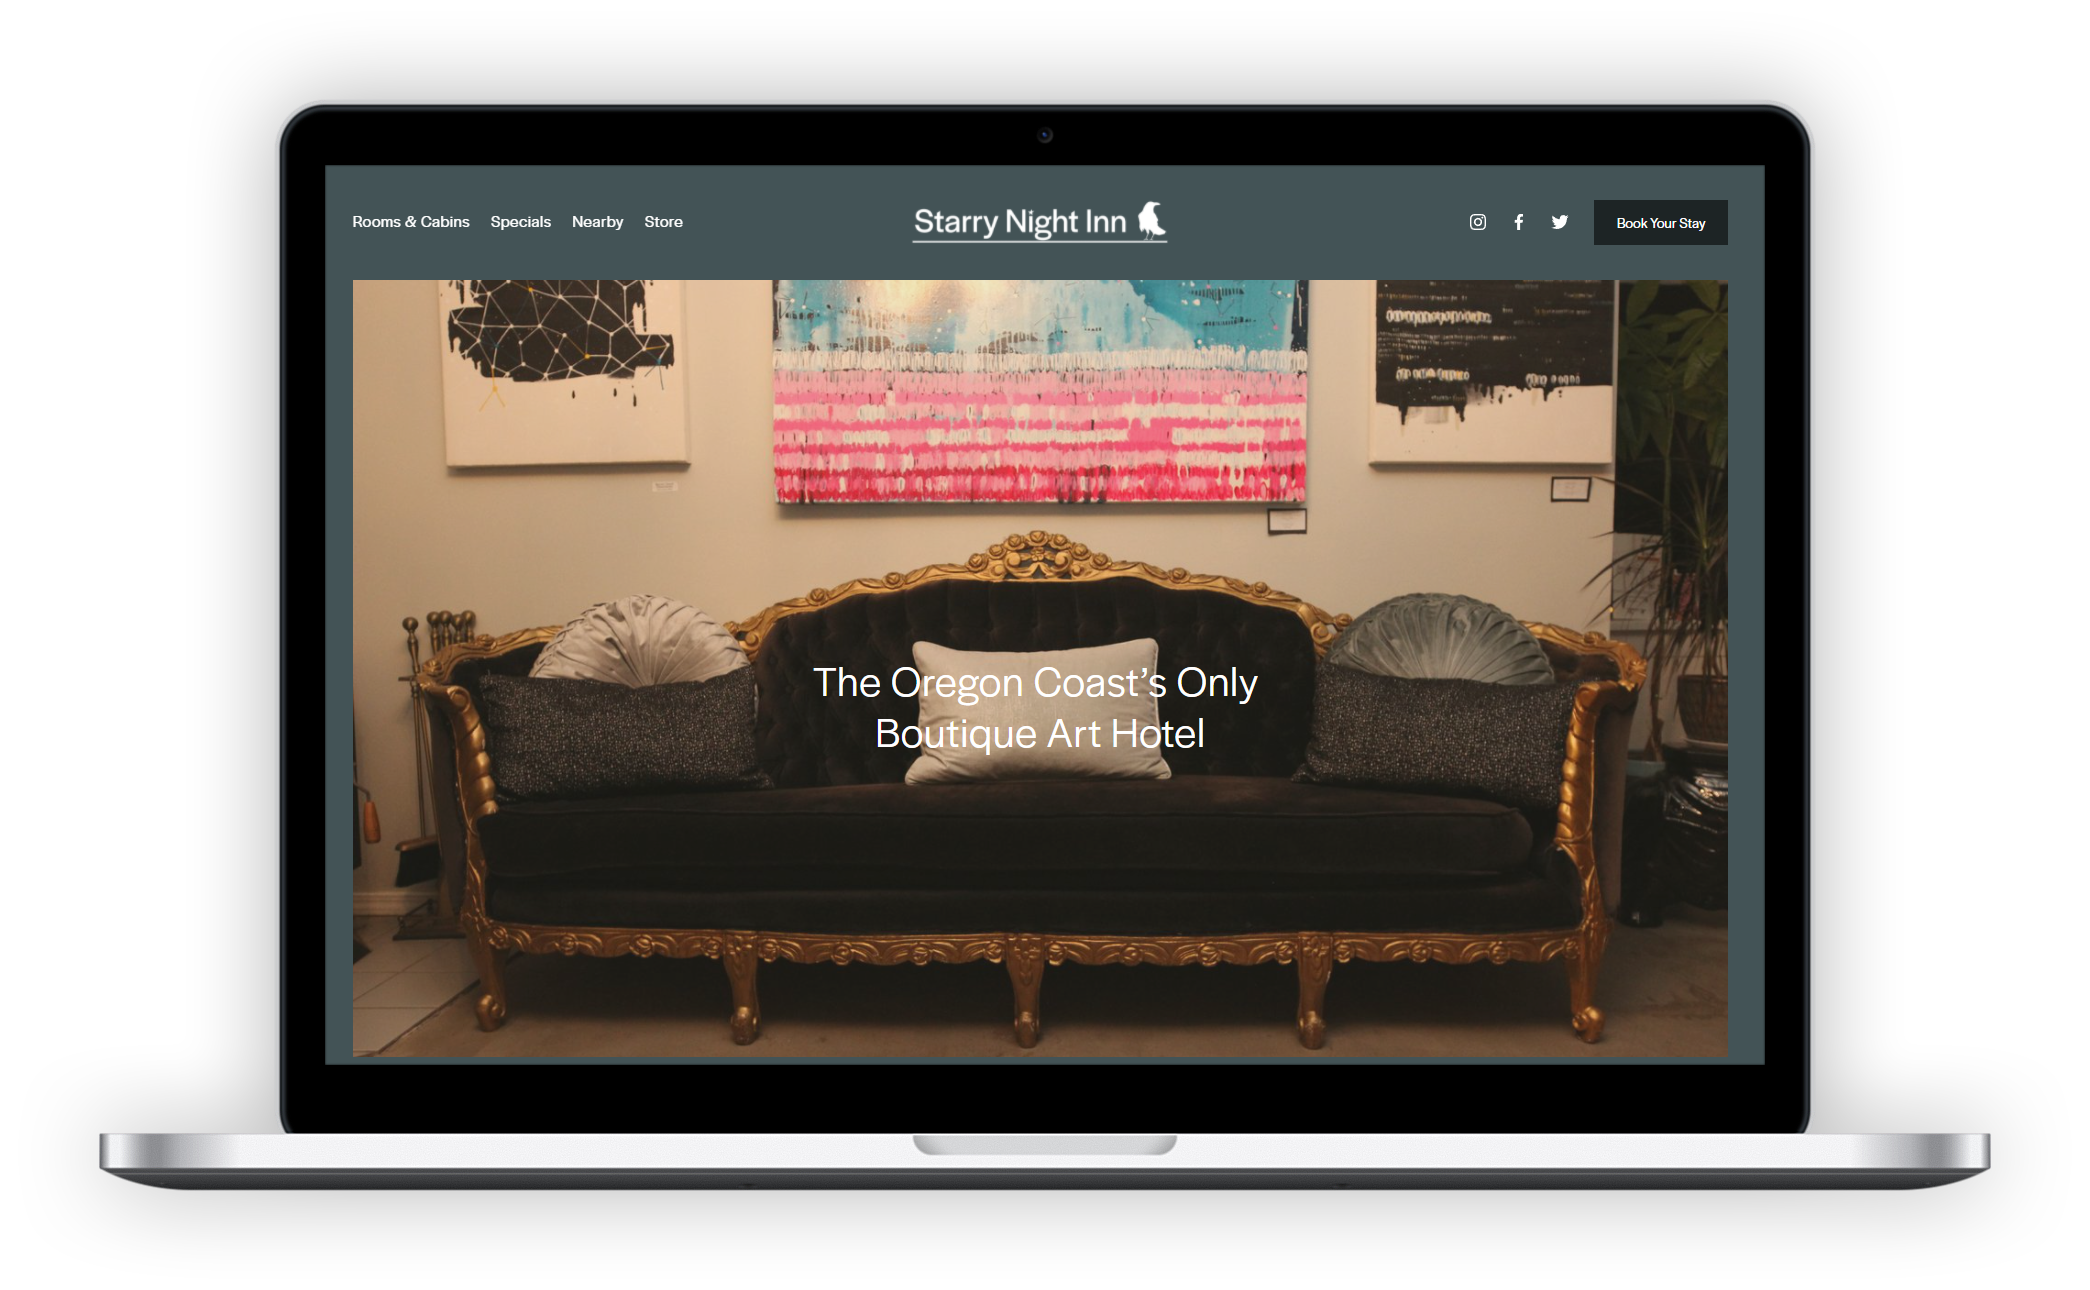 A new website for the Starry Night Inn